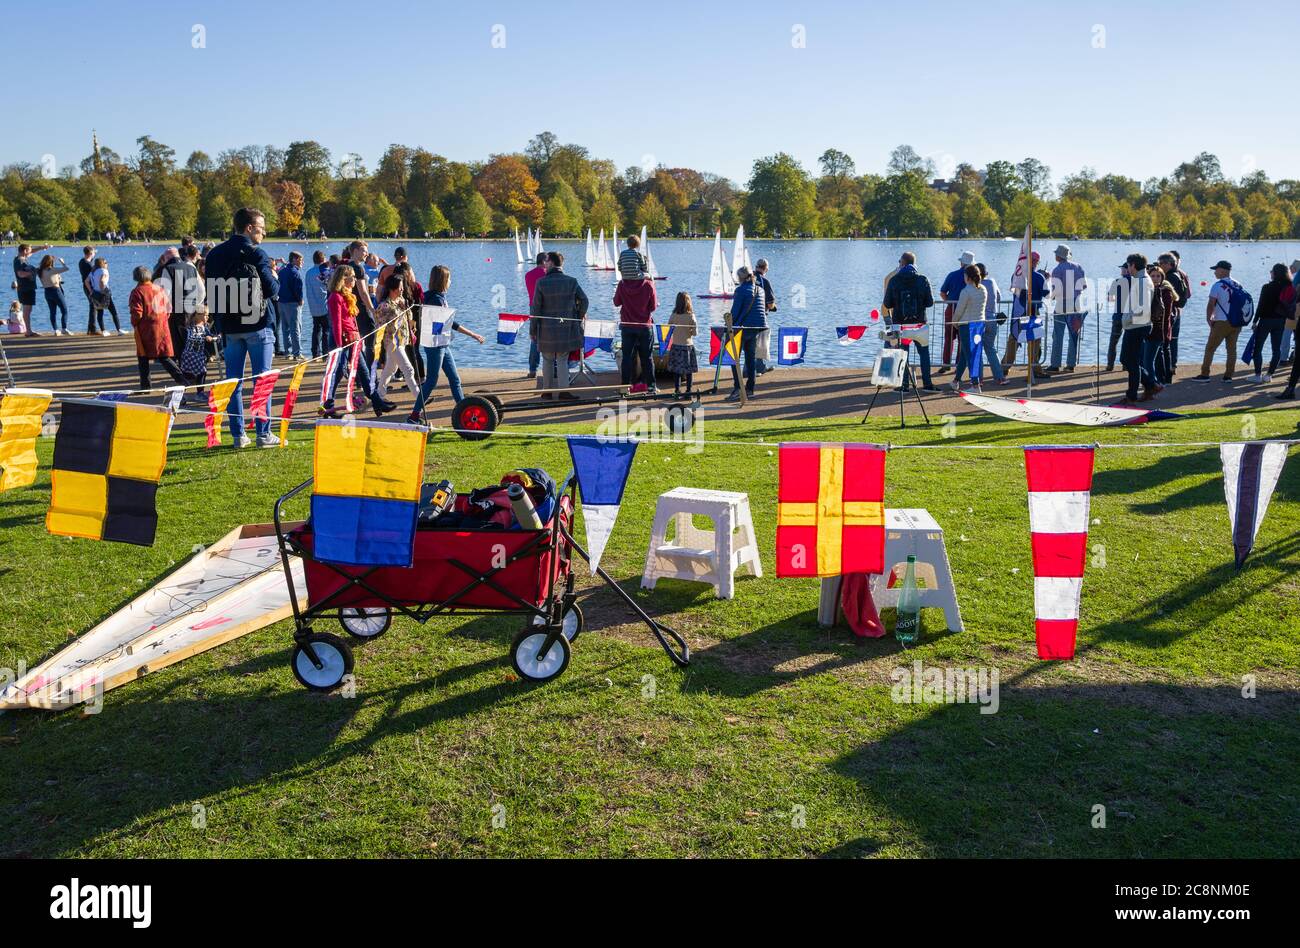 Model boats and their owners at the Serpentine in Hyde Park on a beautifully sunny and colourful autumn day. Colourful flags backlit in the foreground Stock Photo